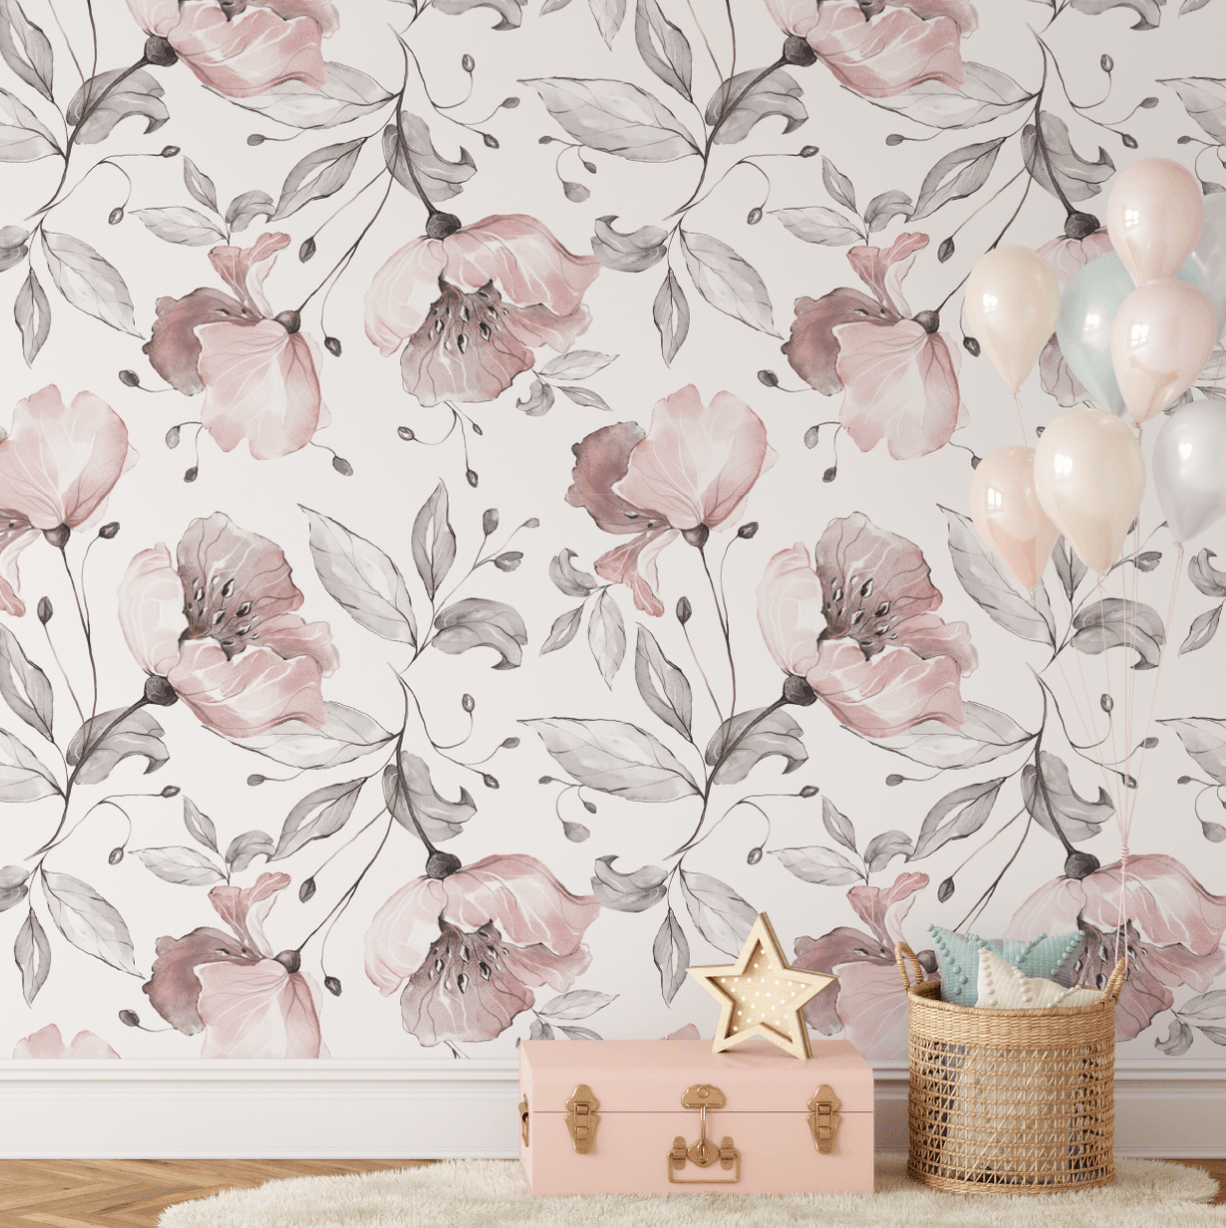 Once Upon A Flower Peel and Stick Wallpaper